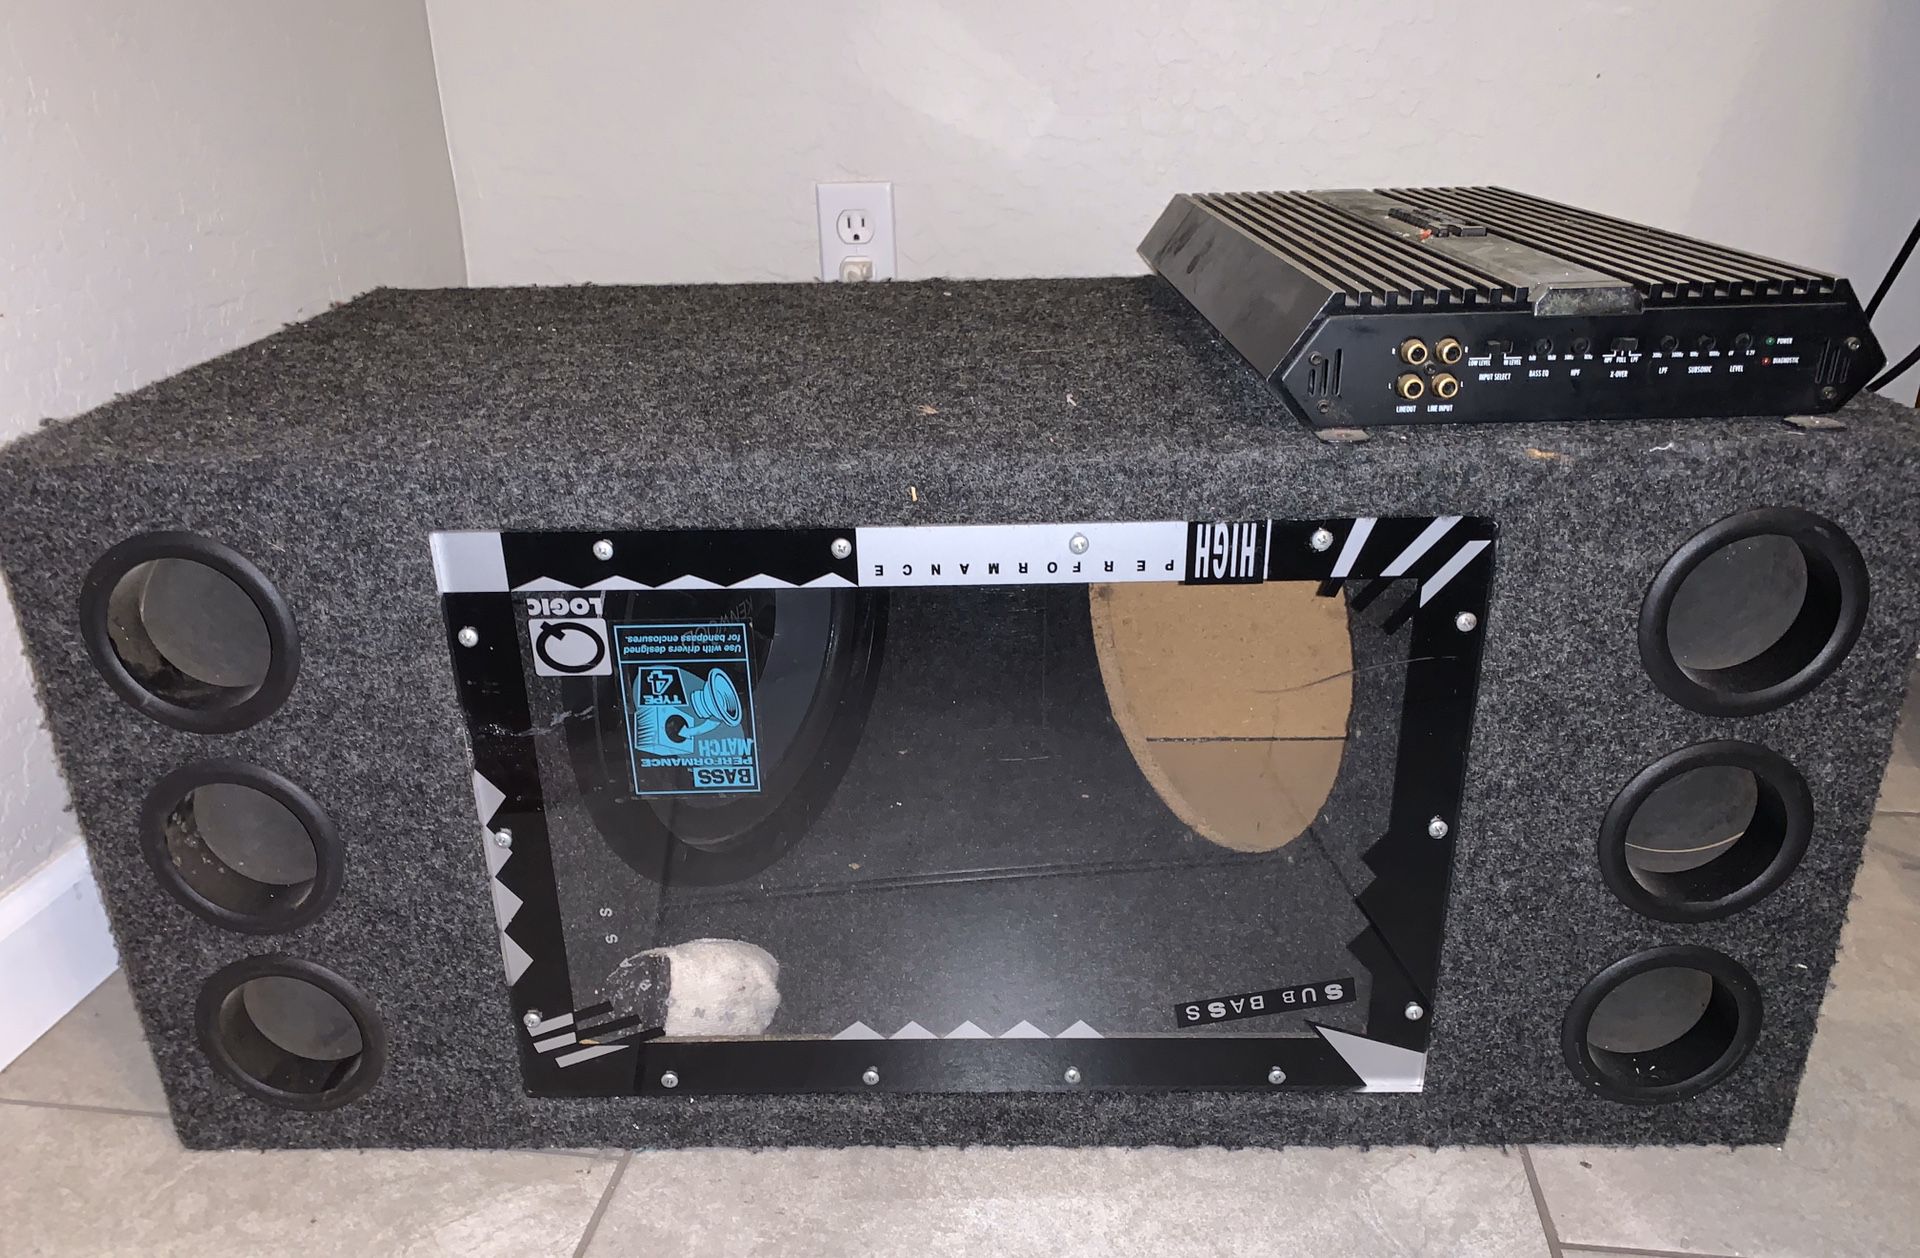 Subwoofer in box and amp